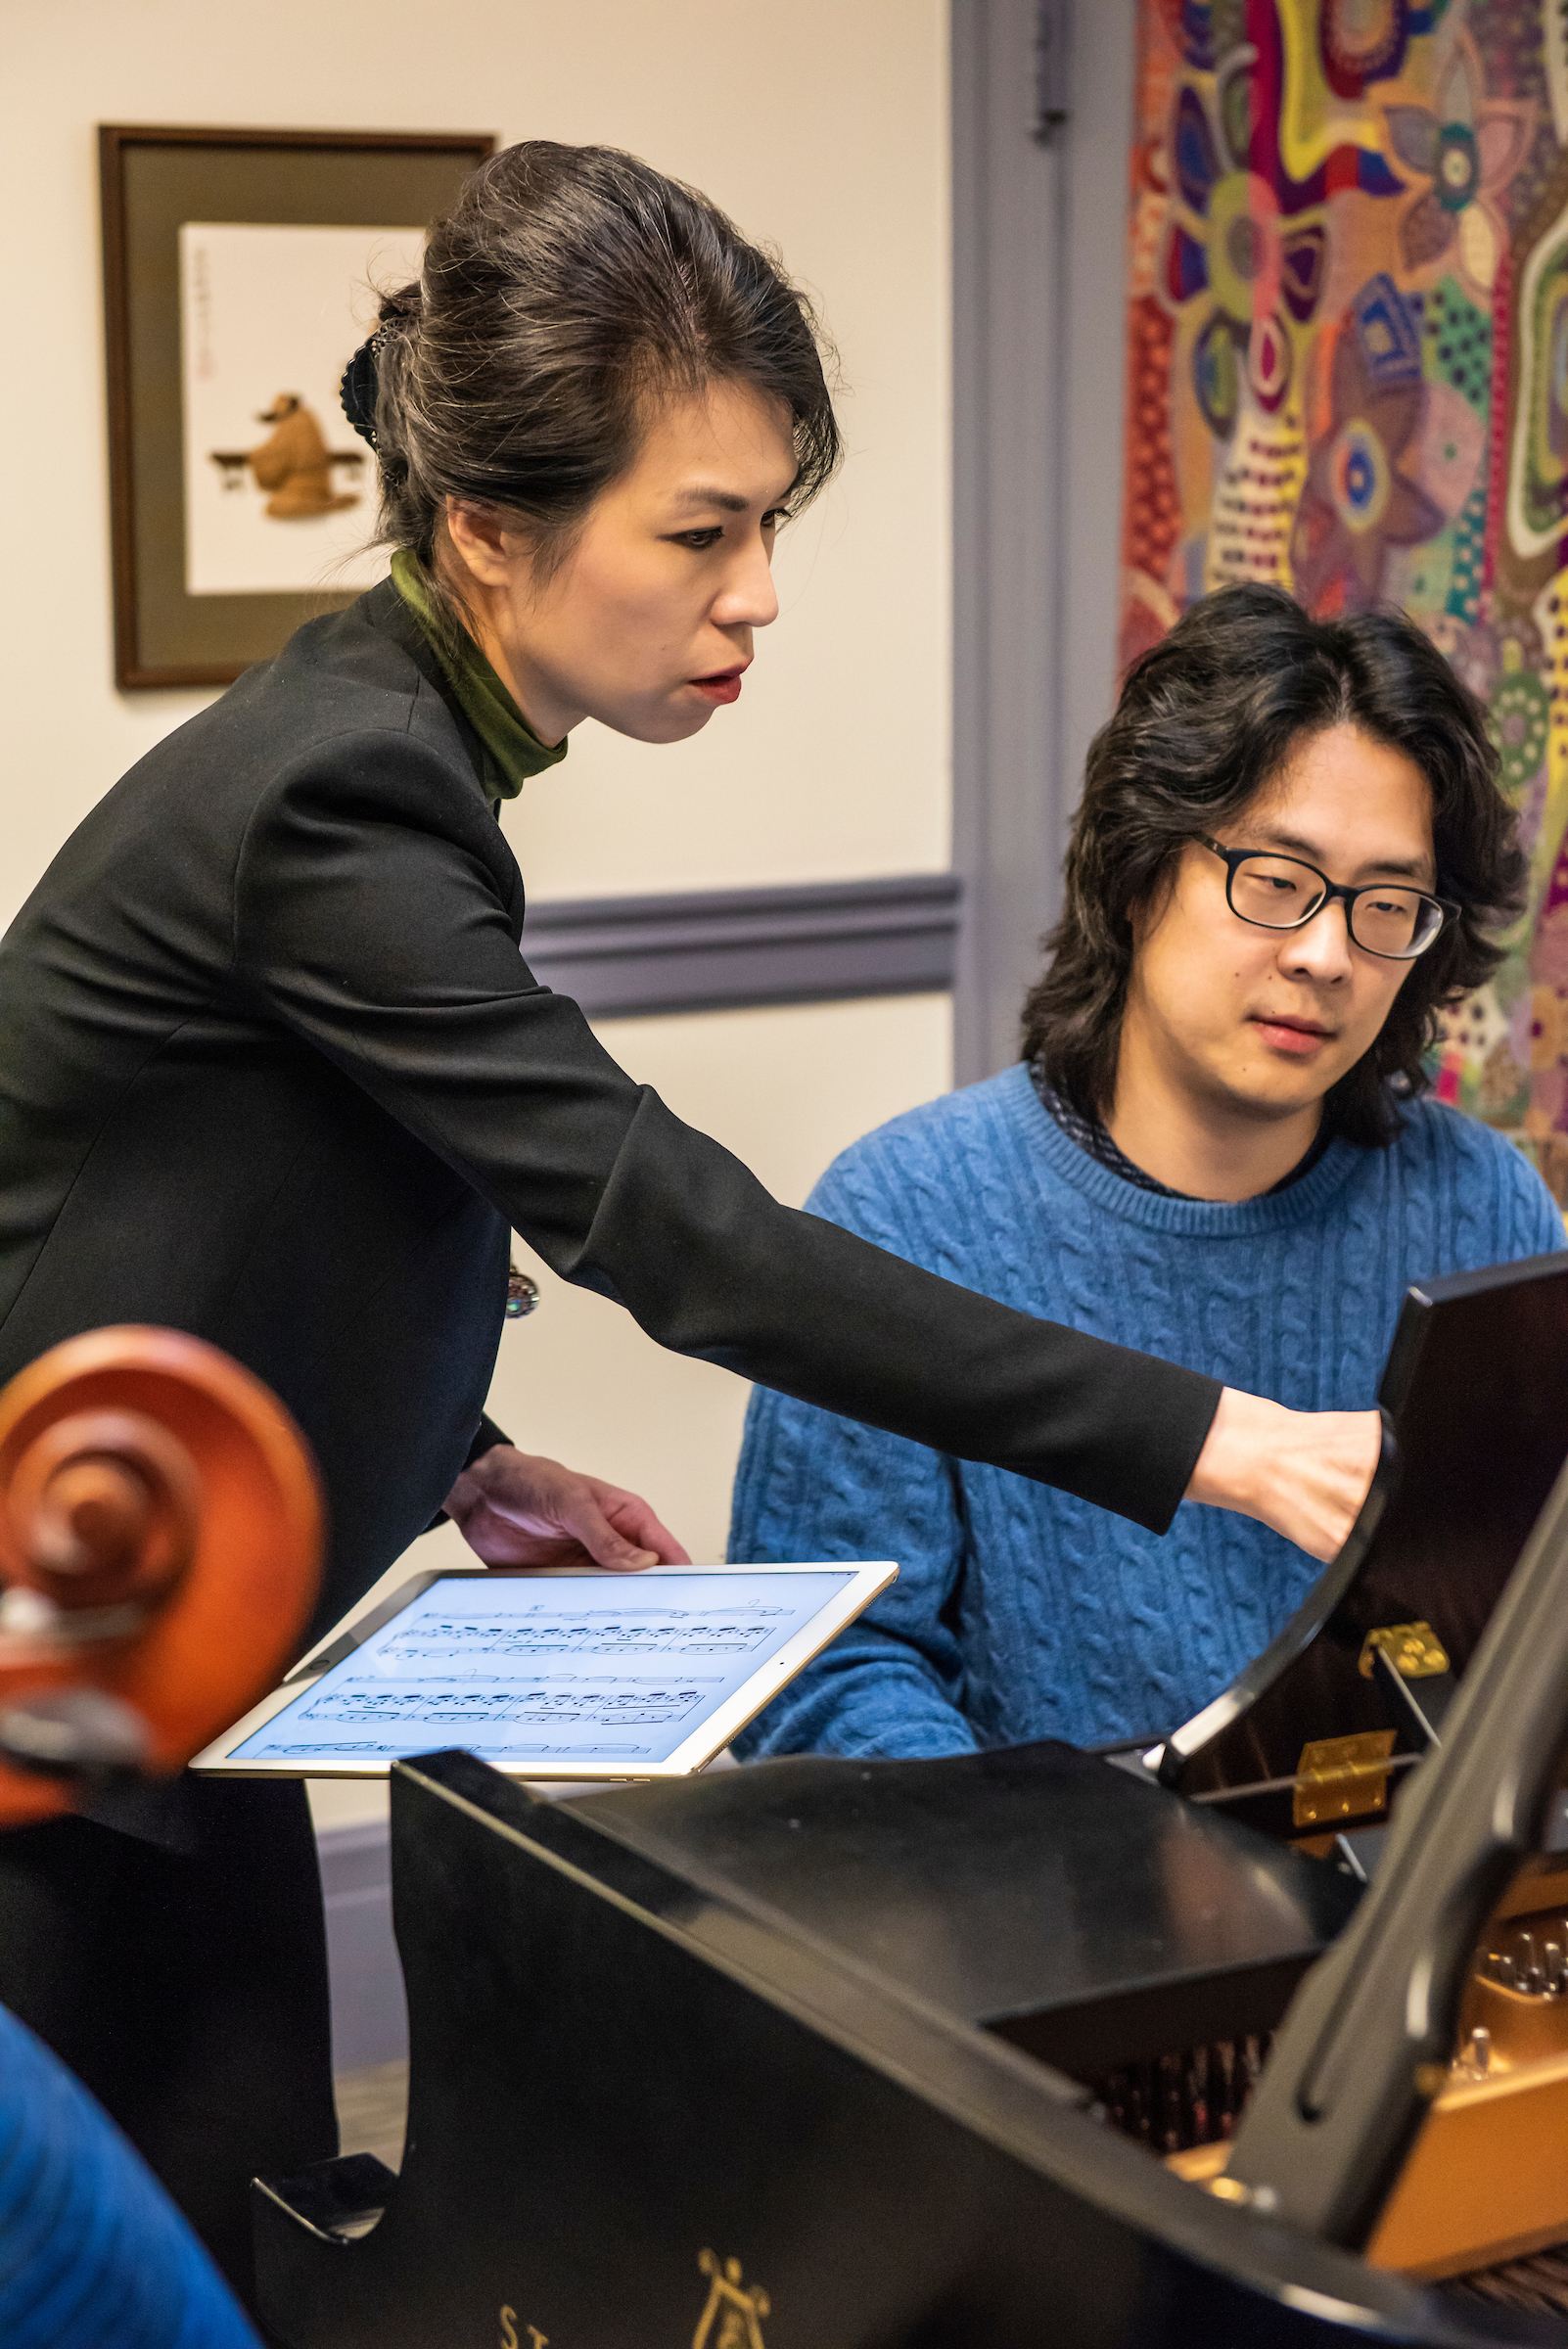 Pei-Shan Lee points toward the music for a pianist. The scroll of a cello can be seen in the foreground.